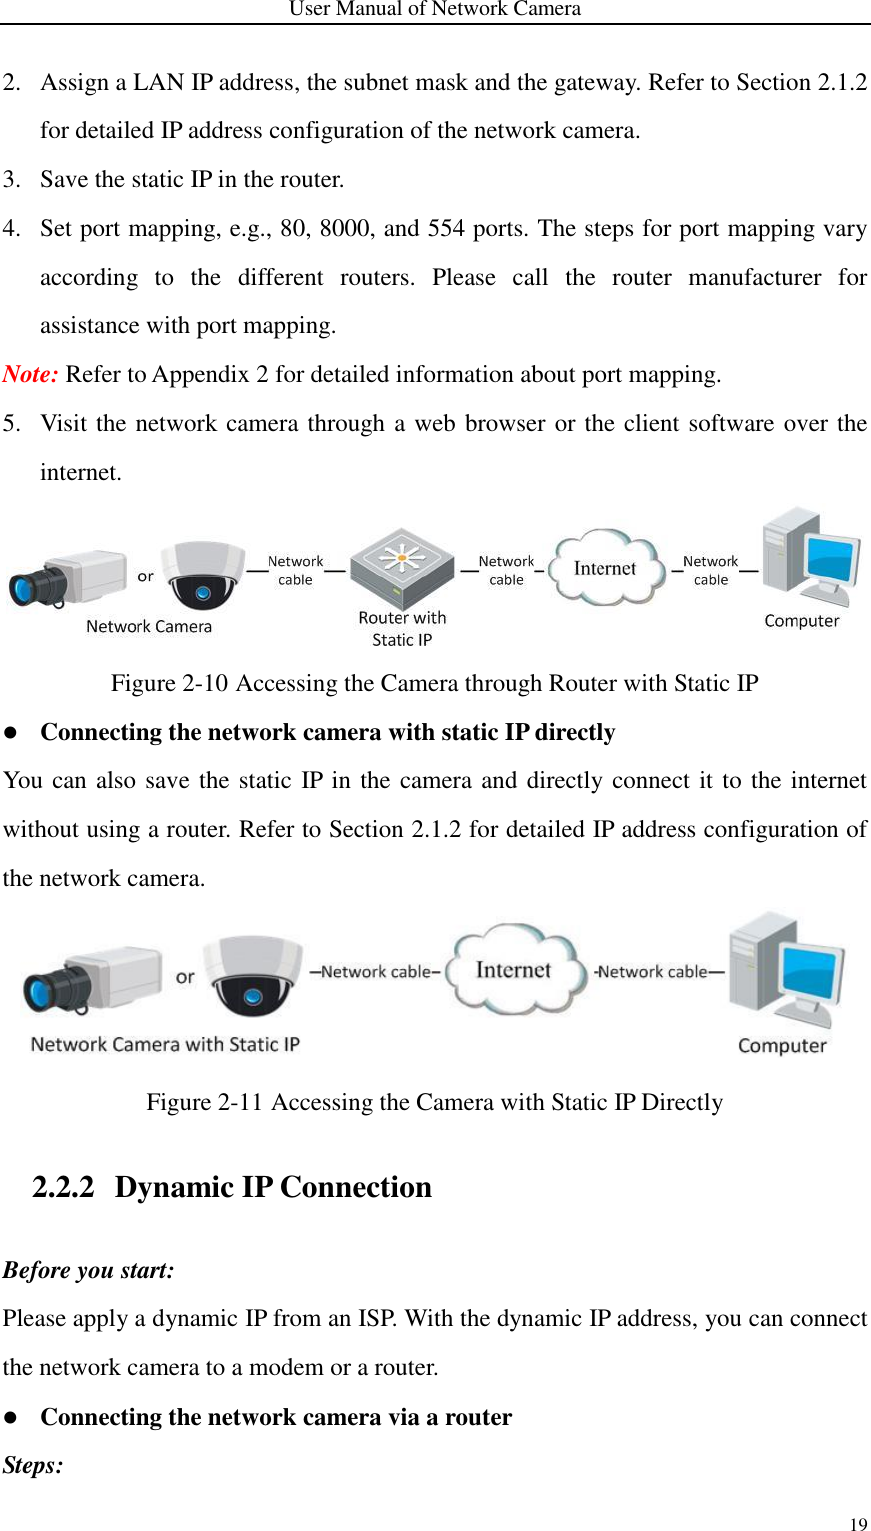 User Manual of Network Camera 19  2. Assign a LAN IP address, the subnet mask and the gateway. Refer to Section 2.1.2 for detailed IP address configuration of the network camera. 3. Save the static IP in the router. 4. Set port mapping, e.g., 80, 8000, and 554 ports. The steps for port mapping vary according  to  the  different  routers.  Please  call  the  router  manufacturer  for assistance with port mapping. Note: Refer to Appendix 2 for detailed information about port mapping. 5. Visit the network camera through a web browser or the client software over the internet.  Figure 2-10 Accessing the Camera through Router with Static IP  Connecting the network camera with static IP directly You can also save the static IP in the camera and directly connect it to the internet without using a router. Refer to Section 2.1.2 for detailed IP address configuration of the network camera.  Figure 2-11 Accessing the Camera with Static IP Directly 2.2.2 Dynamic IP Connection Before you start: Please apply a dynamic IP from an ISP. With the dynamic IP address, you can connect the network camera to a modem or a router.  Connecting the network camera via a router Steps: 